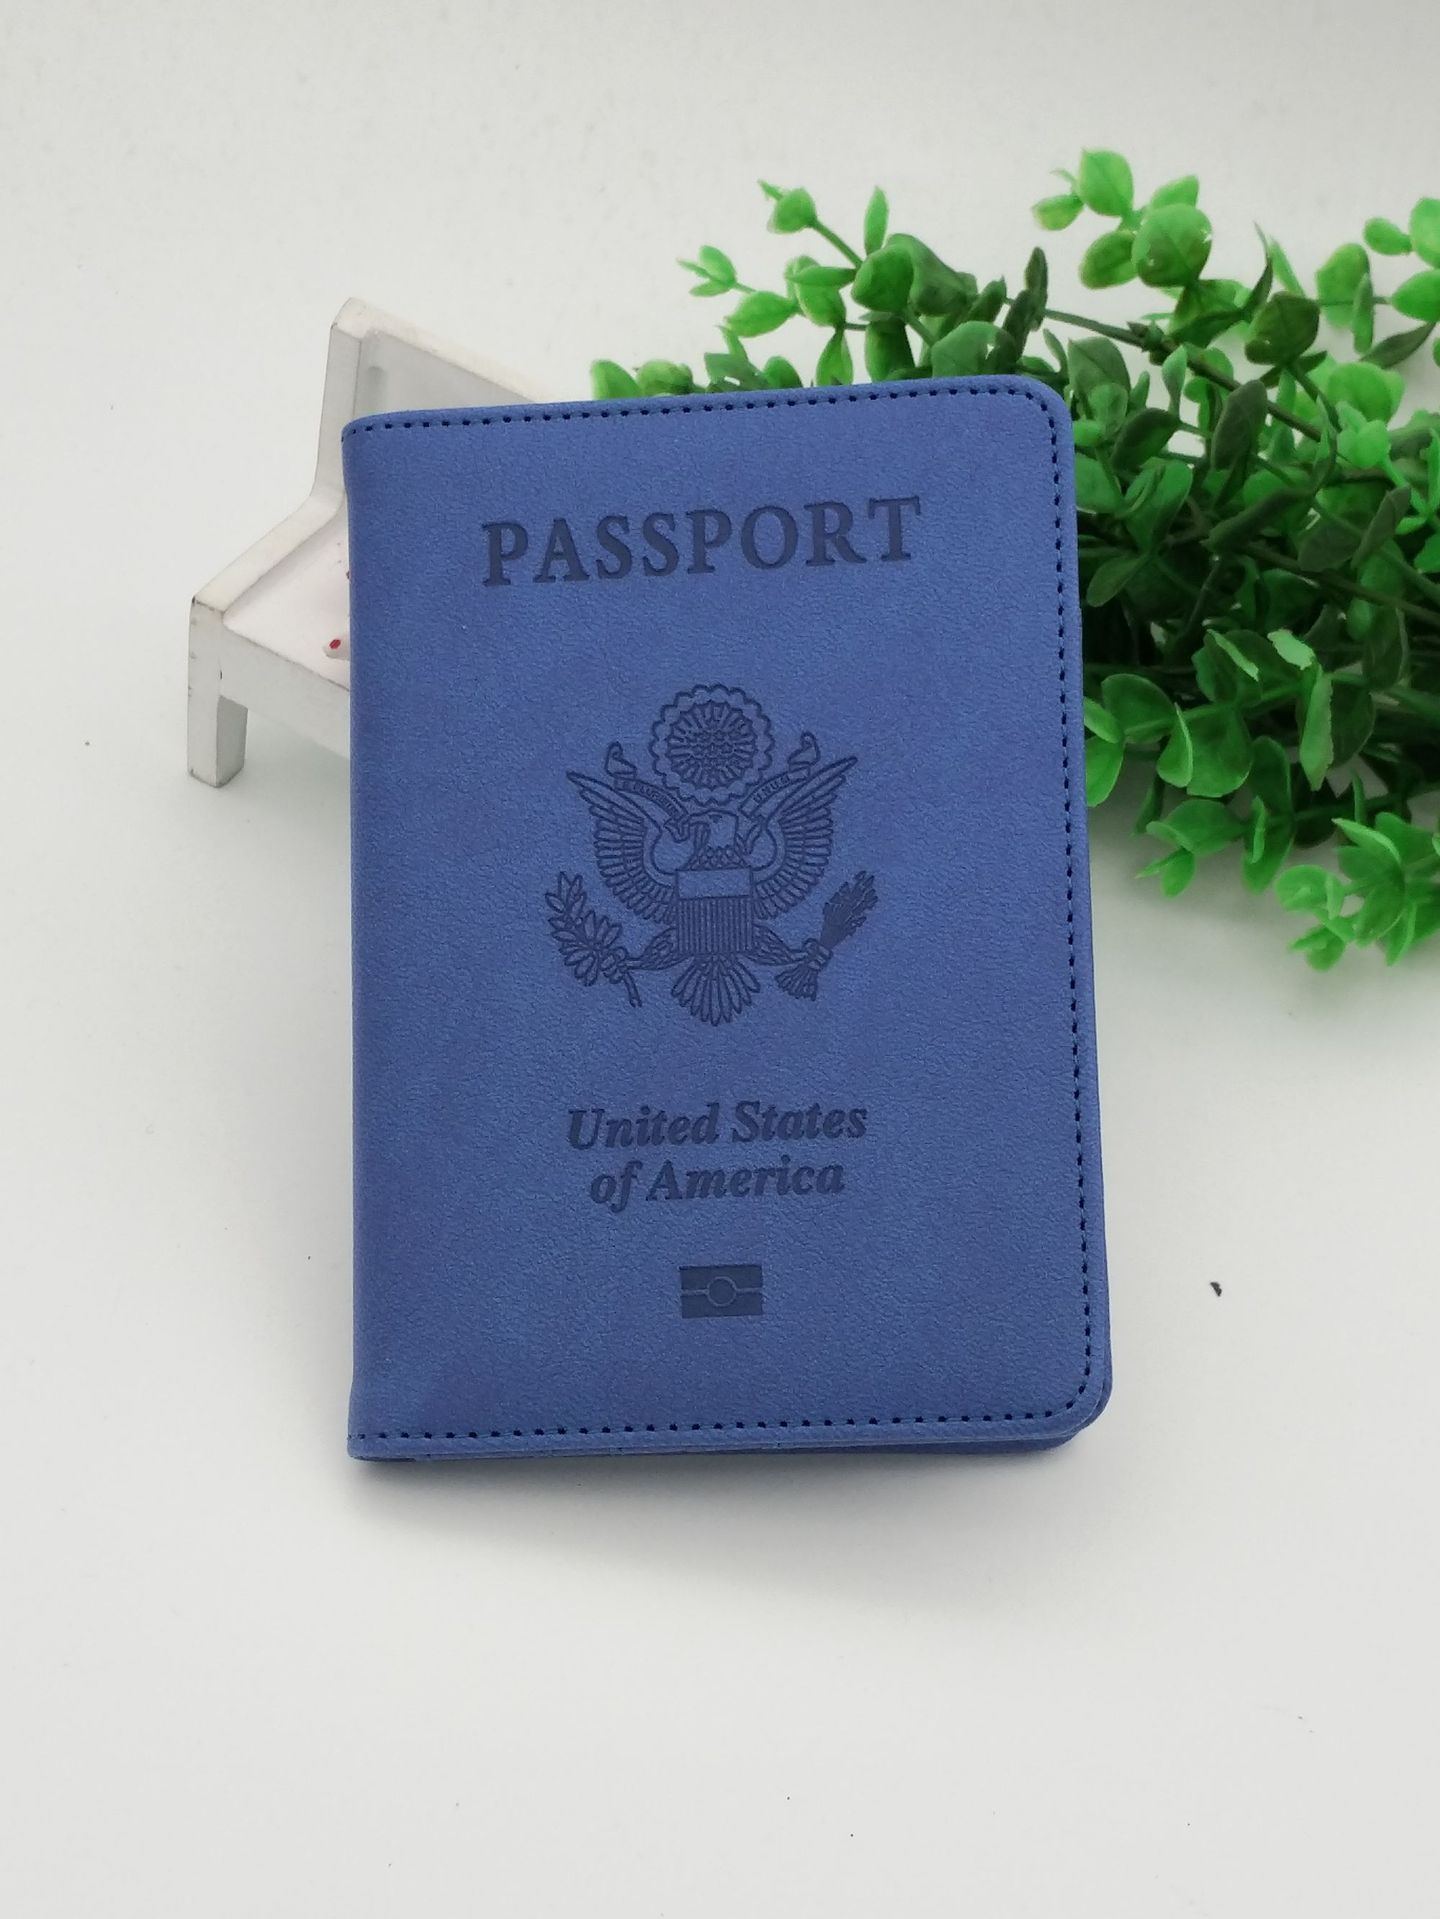 Custom Promotional RFID Passport Cover Faux Leather Cheap Passport Shield